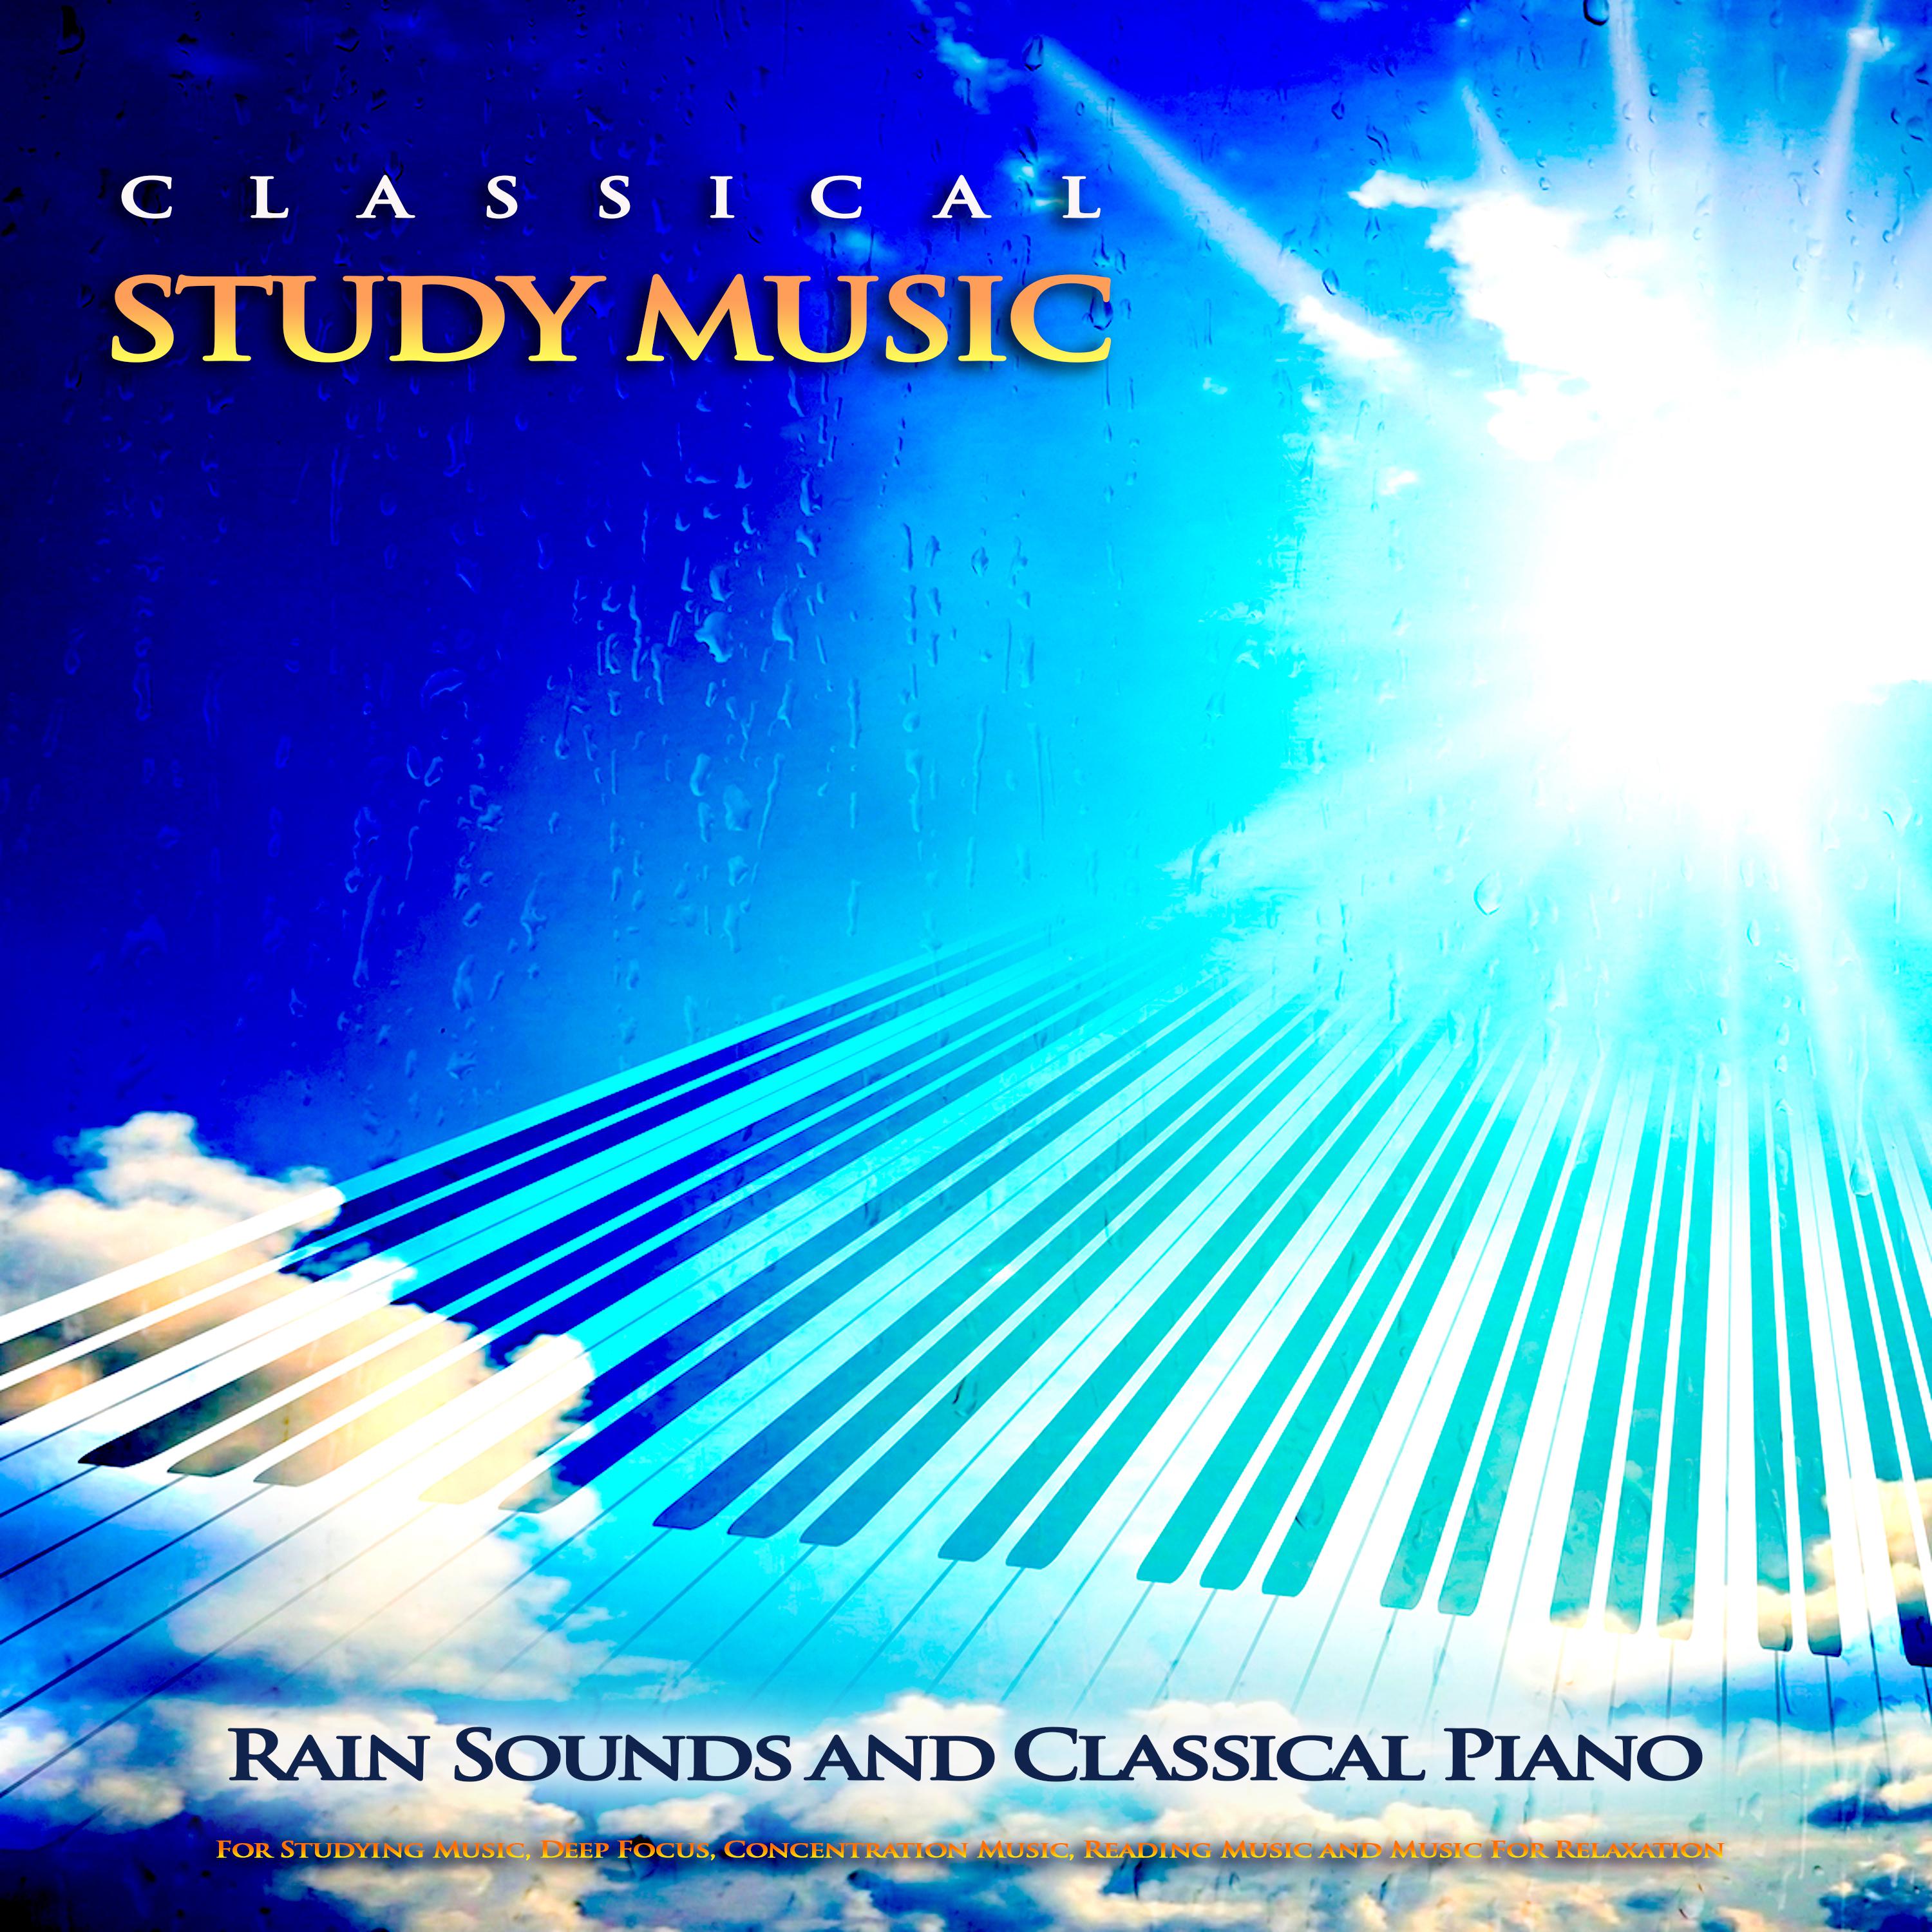 Sweet Dream - Tchaikovsky - Classical Piano Music and Rain Sounds - Classical Study Music